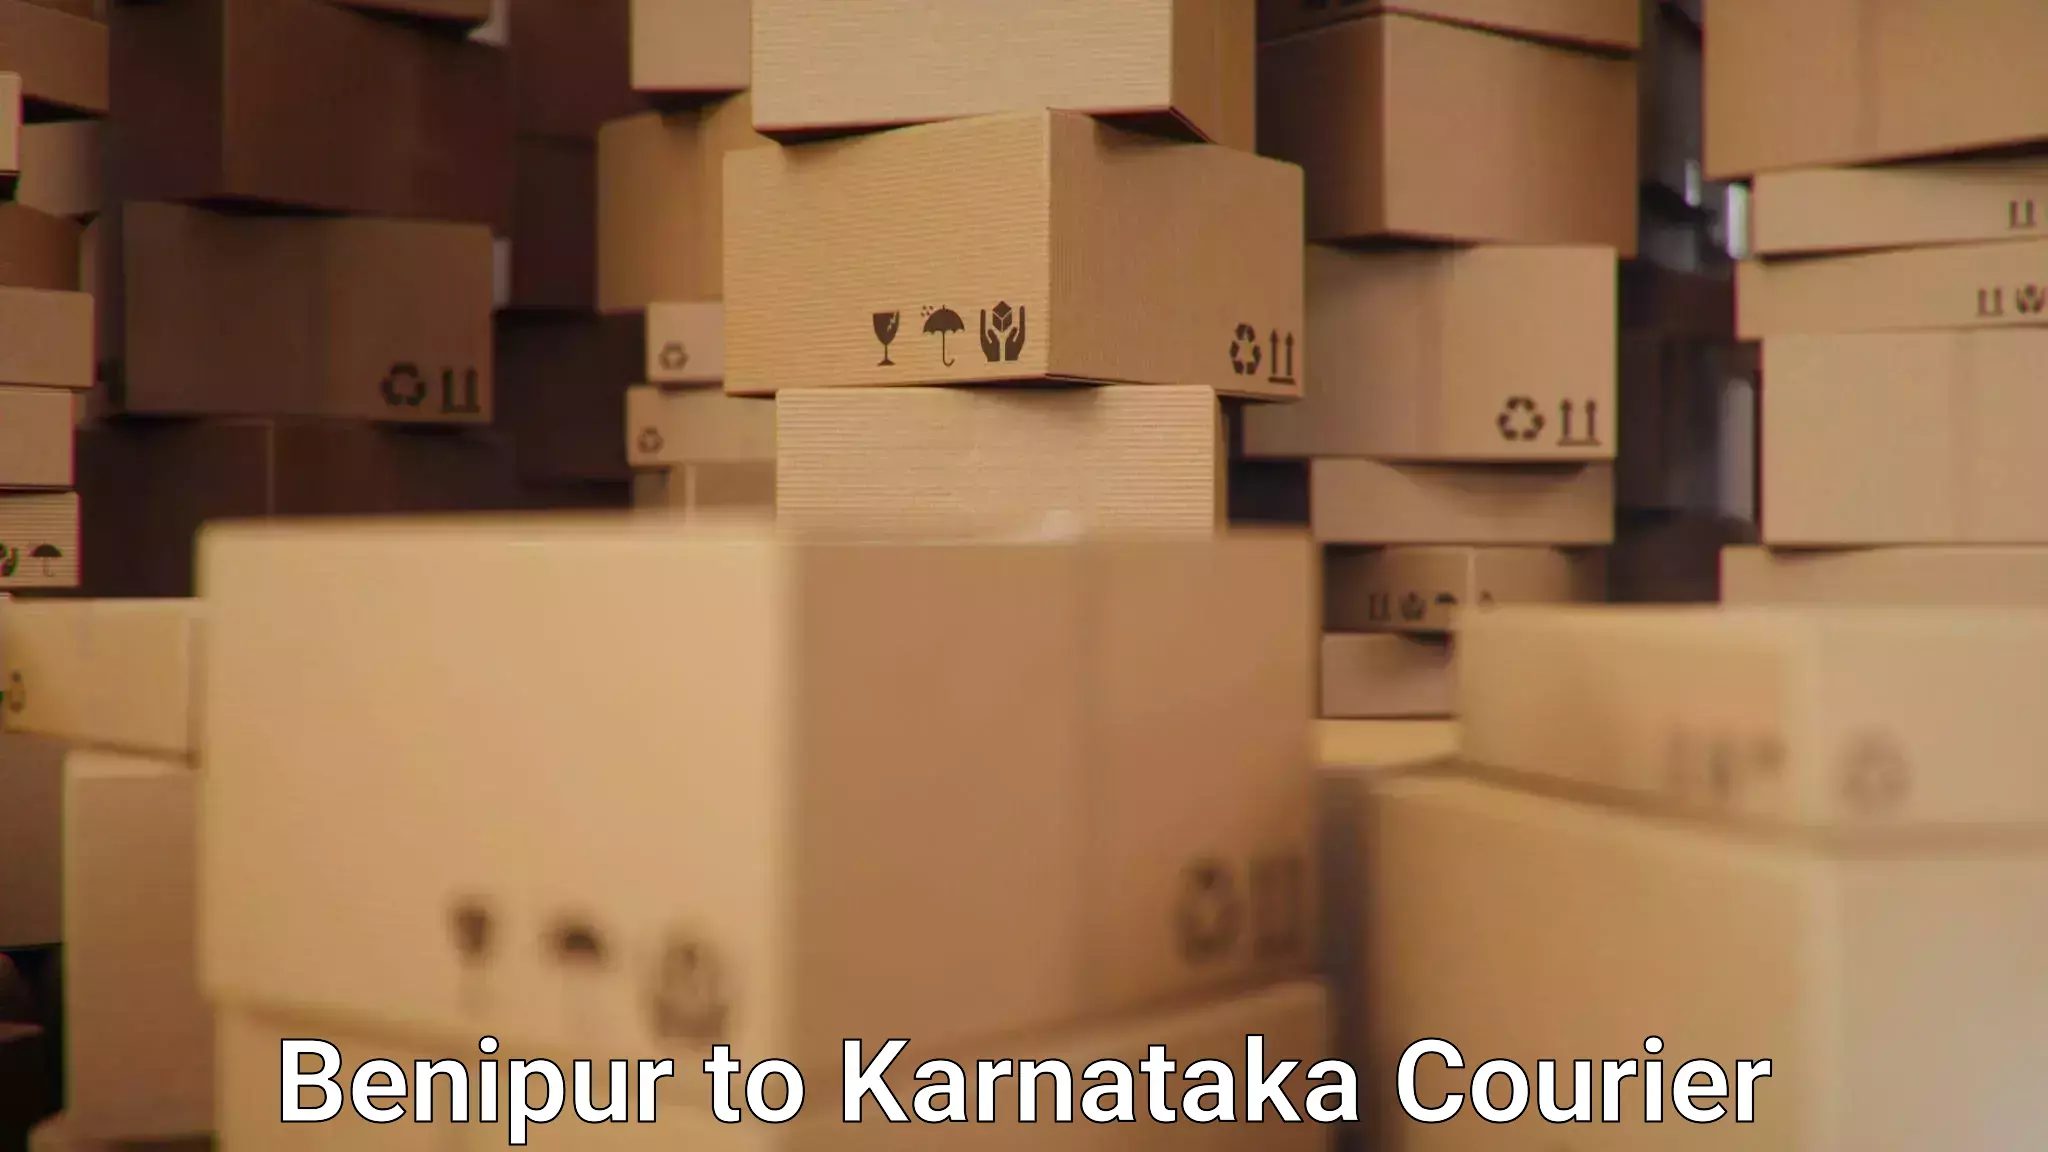 Quick courier services in Benipur to Laxmeshwar